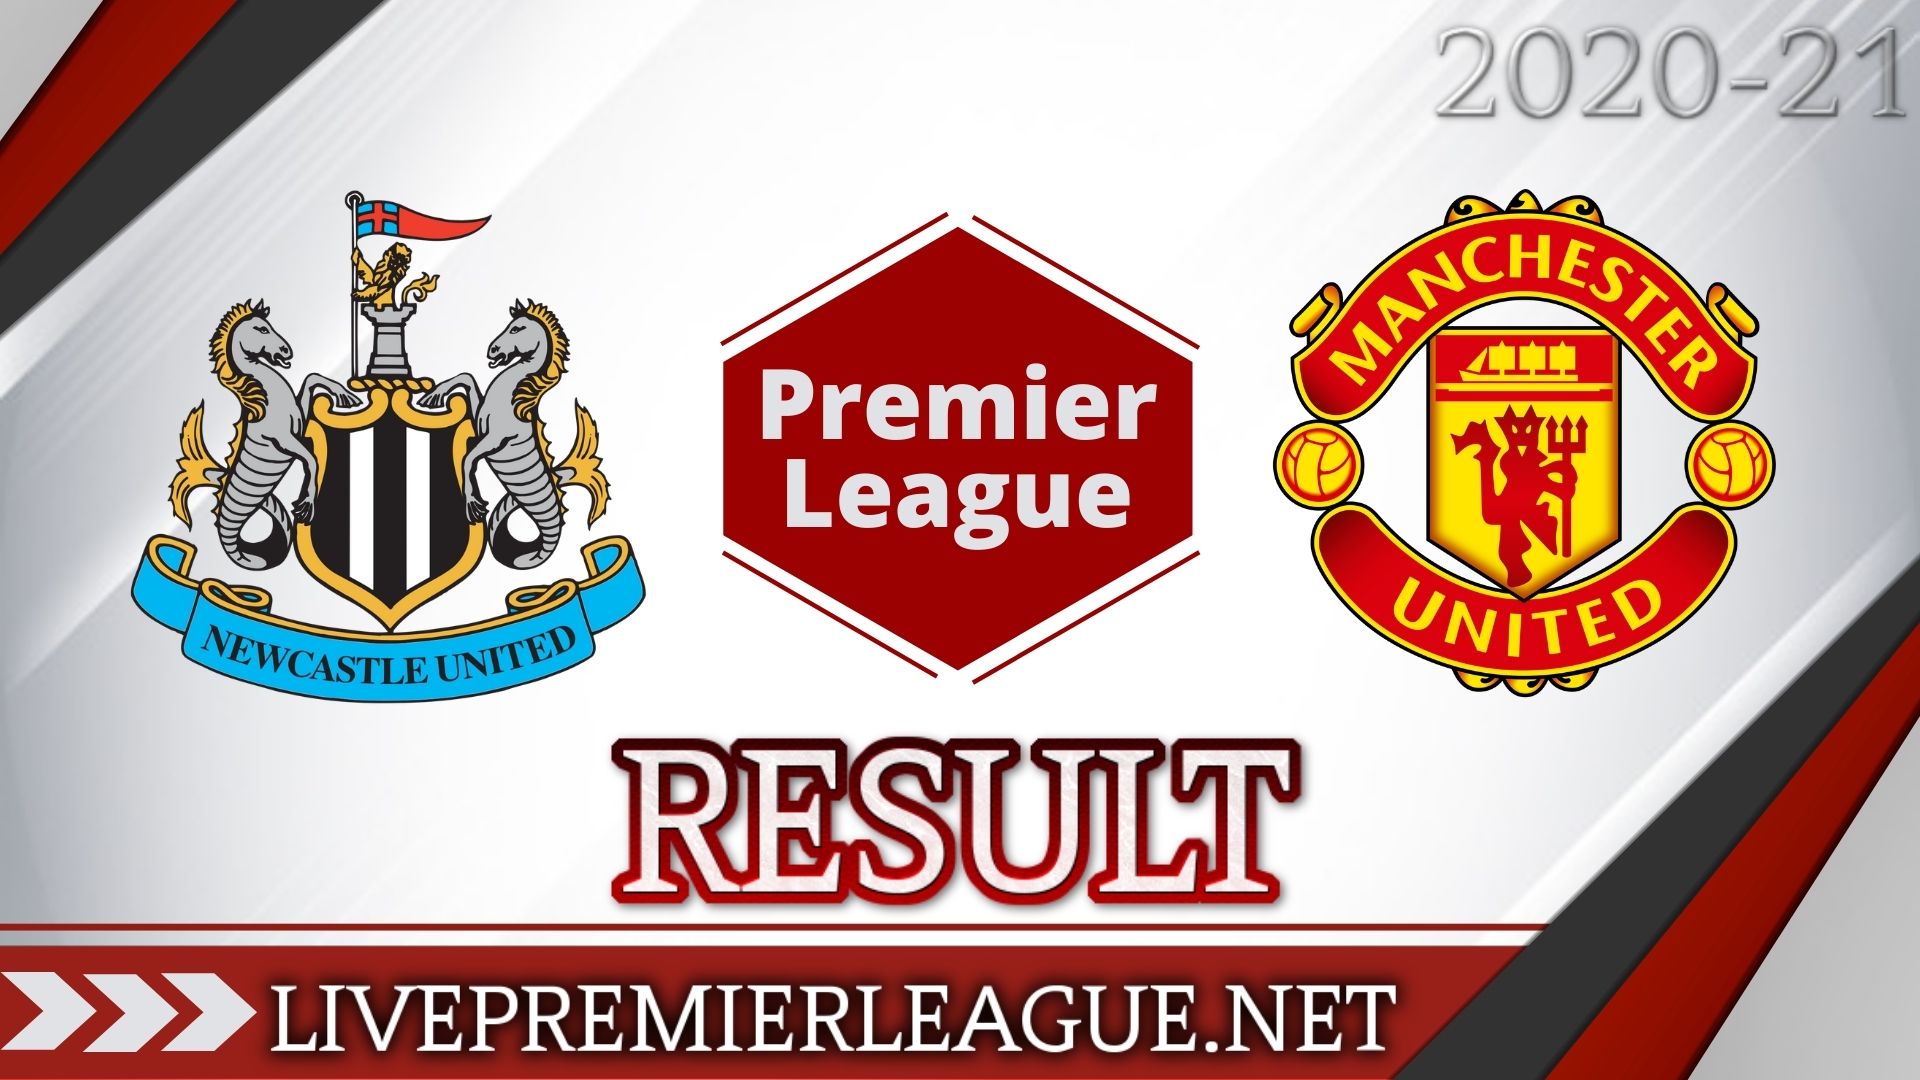 Newcastle United Vs Manchester United | Week 5 Result 2020